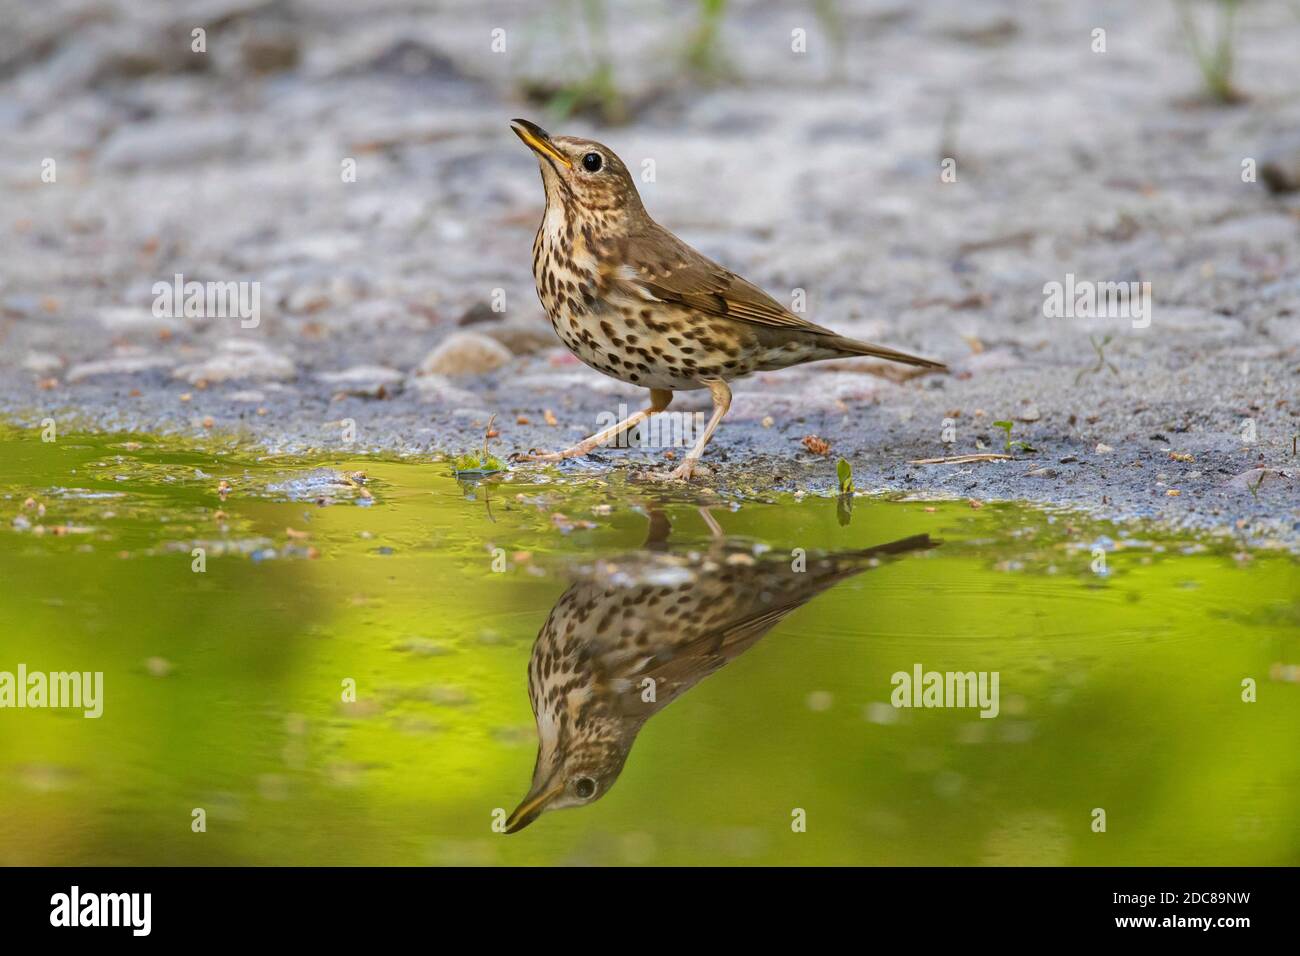 Song thrush (Turdus philomelos) drinking water from pond in summer Stock Photo